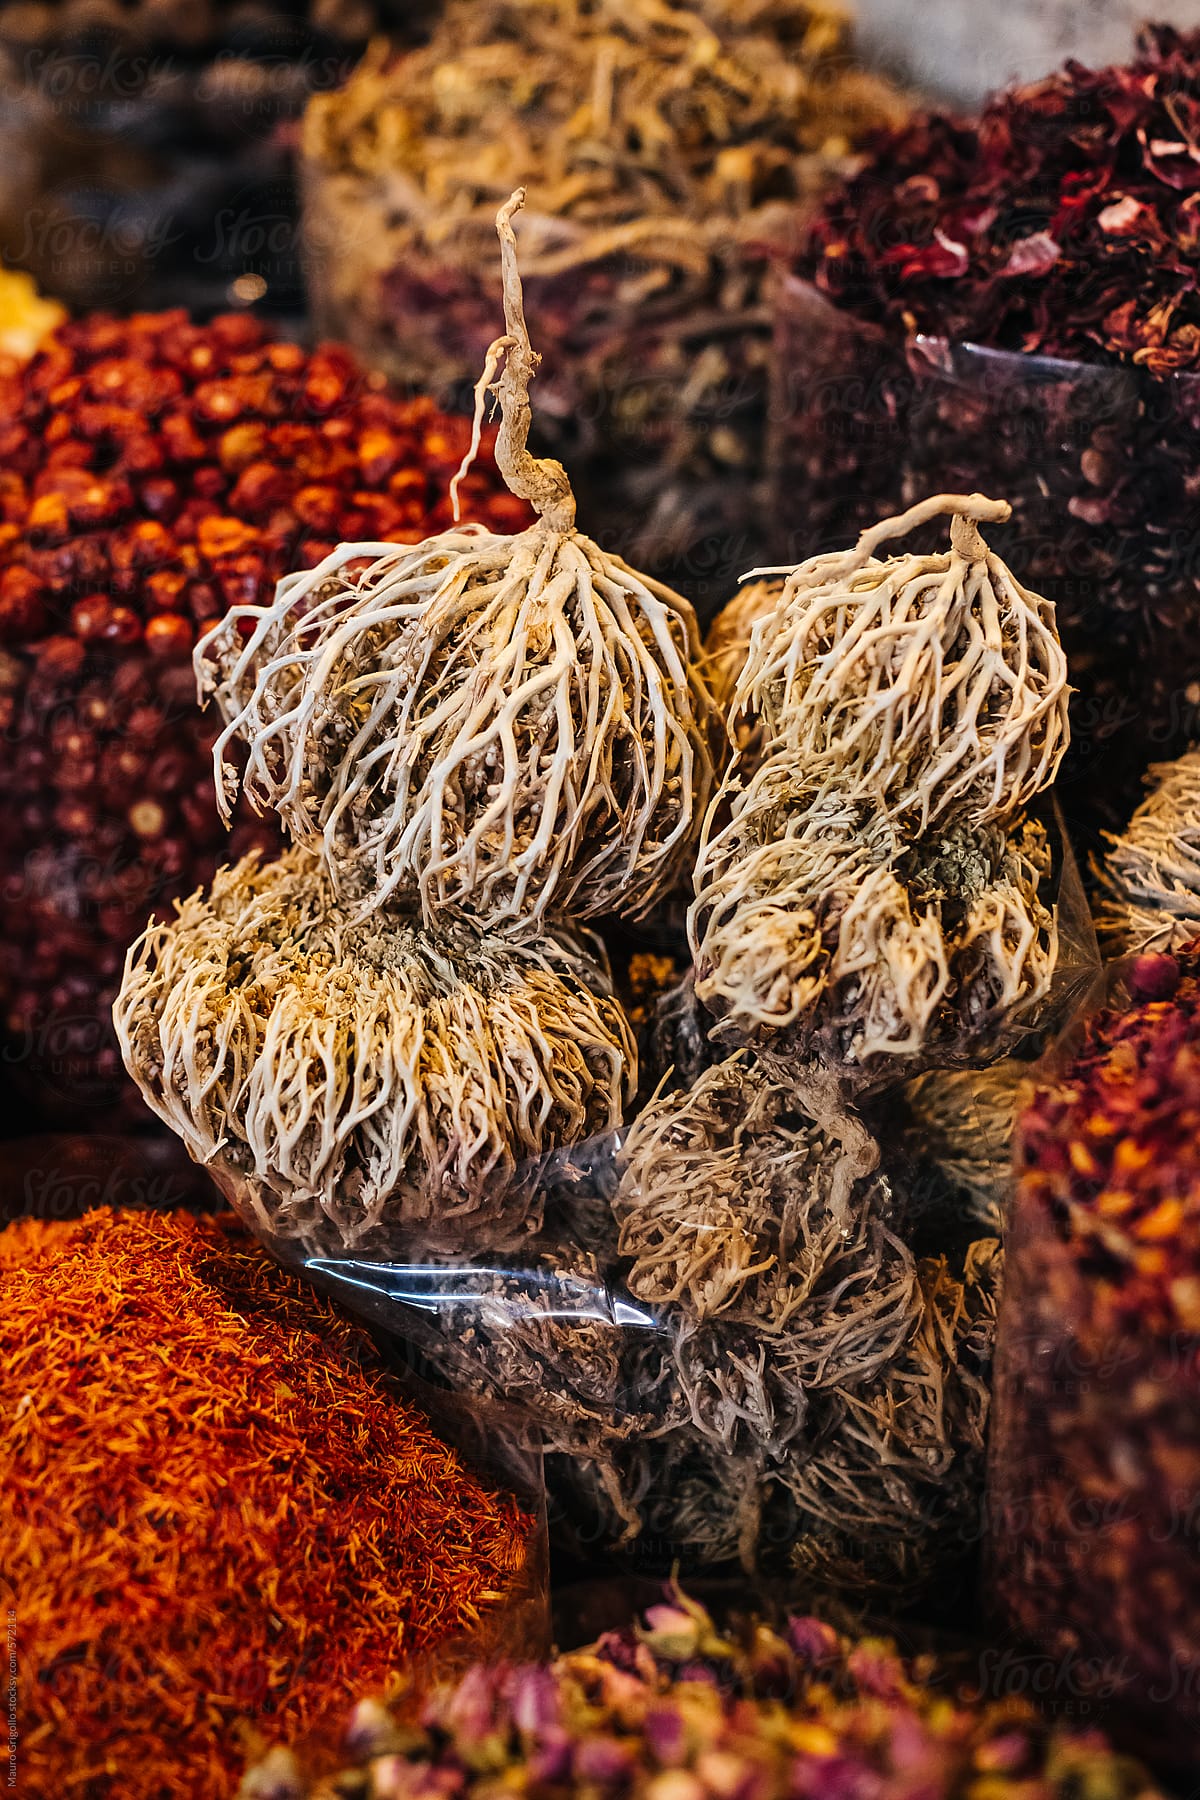 Assortment of spices and herbs at spice souk, Dubai.